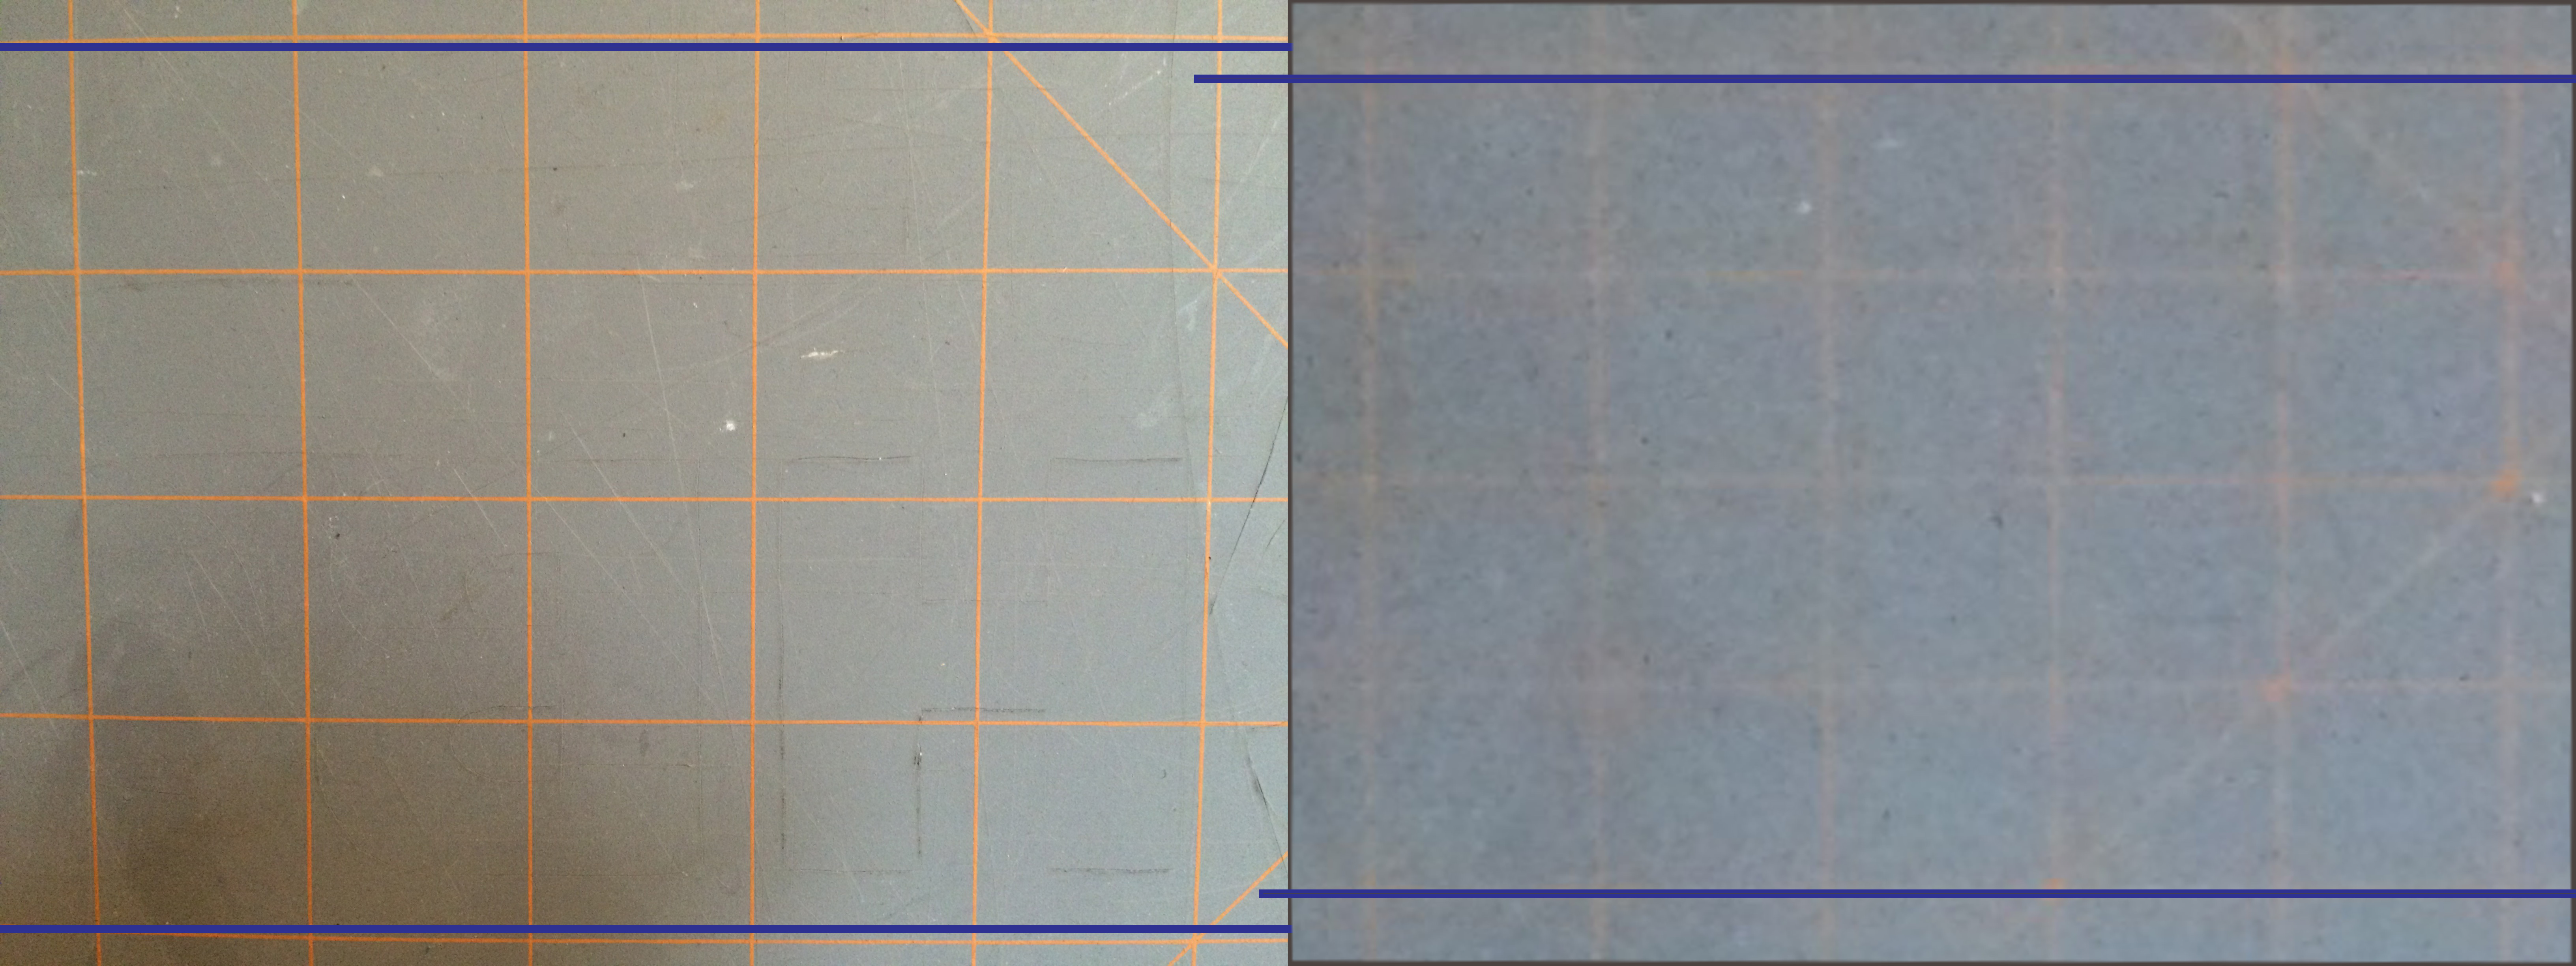 The same squares. One taken up close. The other from further away and then zoomed in. The lines show how the grid curves away. Even though the second photo is much worse in quality, it's more accurate. The filter to fix lens distortion has not been applied to either photo.